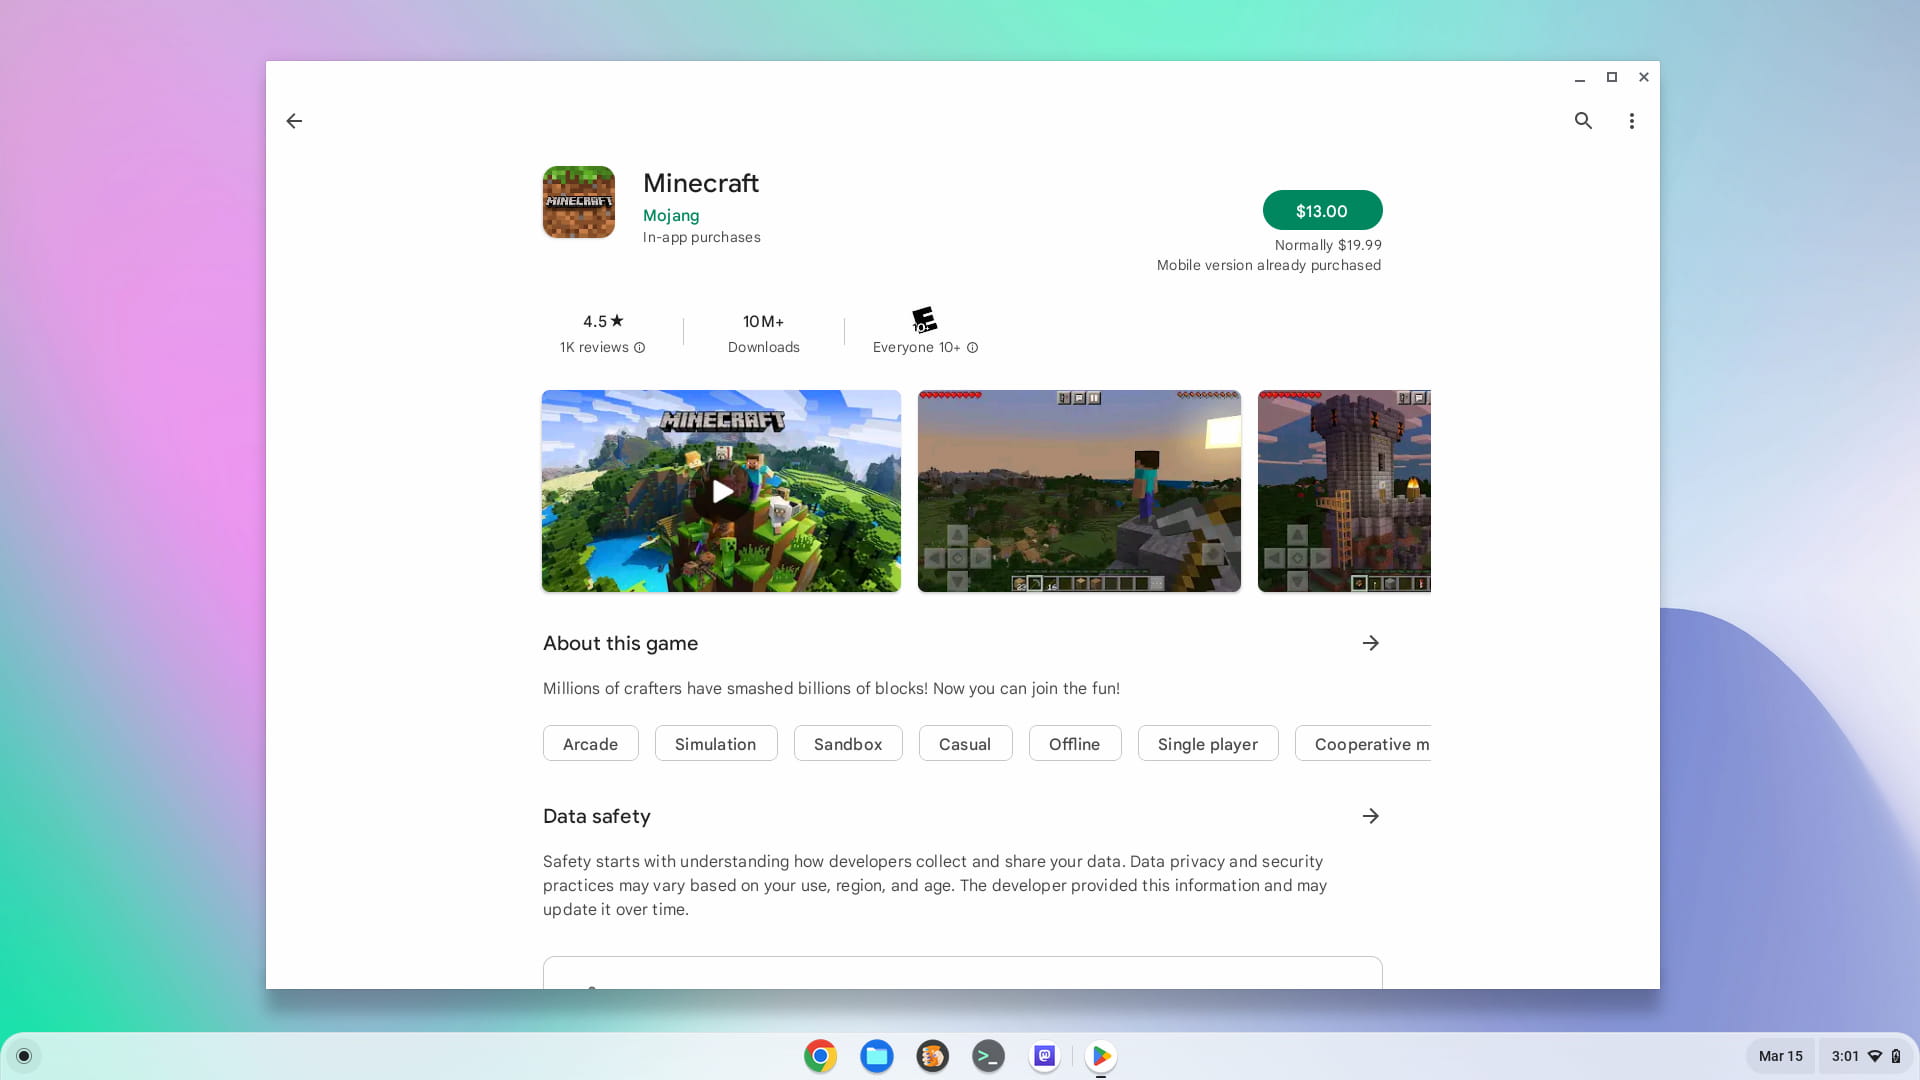 Minecraft for Chromebooks is available in the Google Play Store